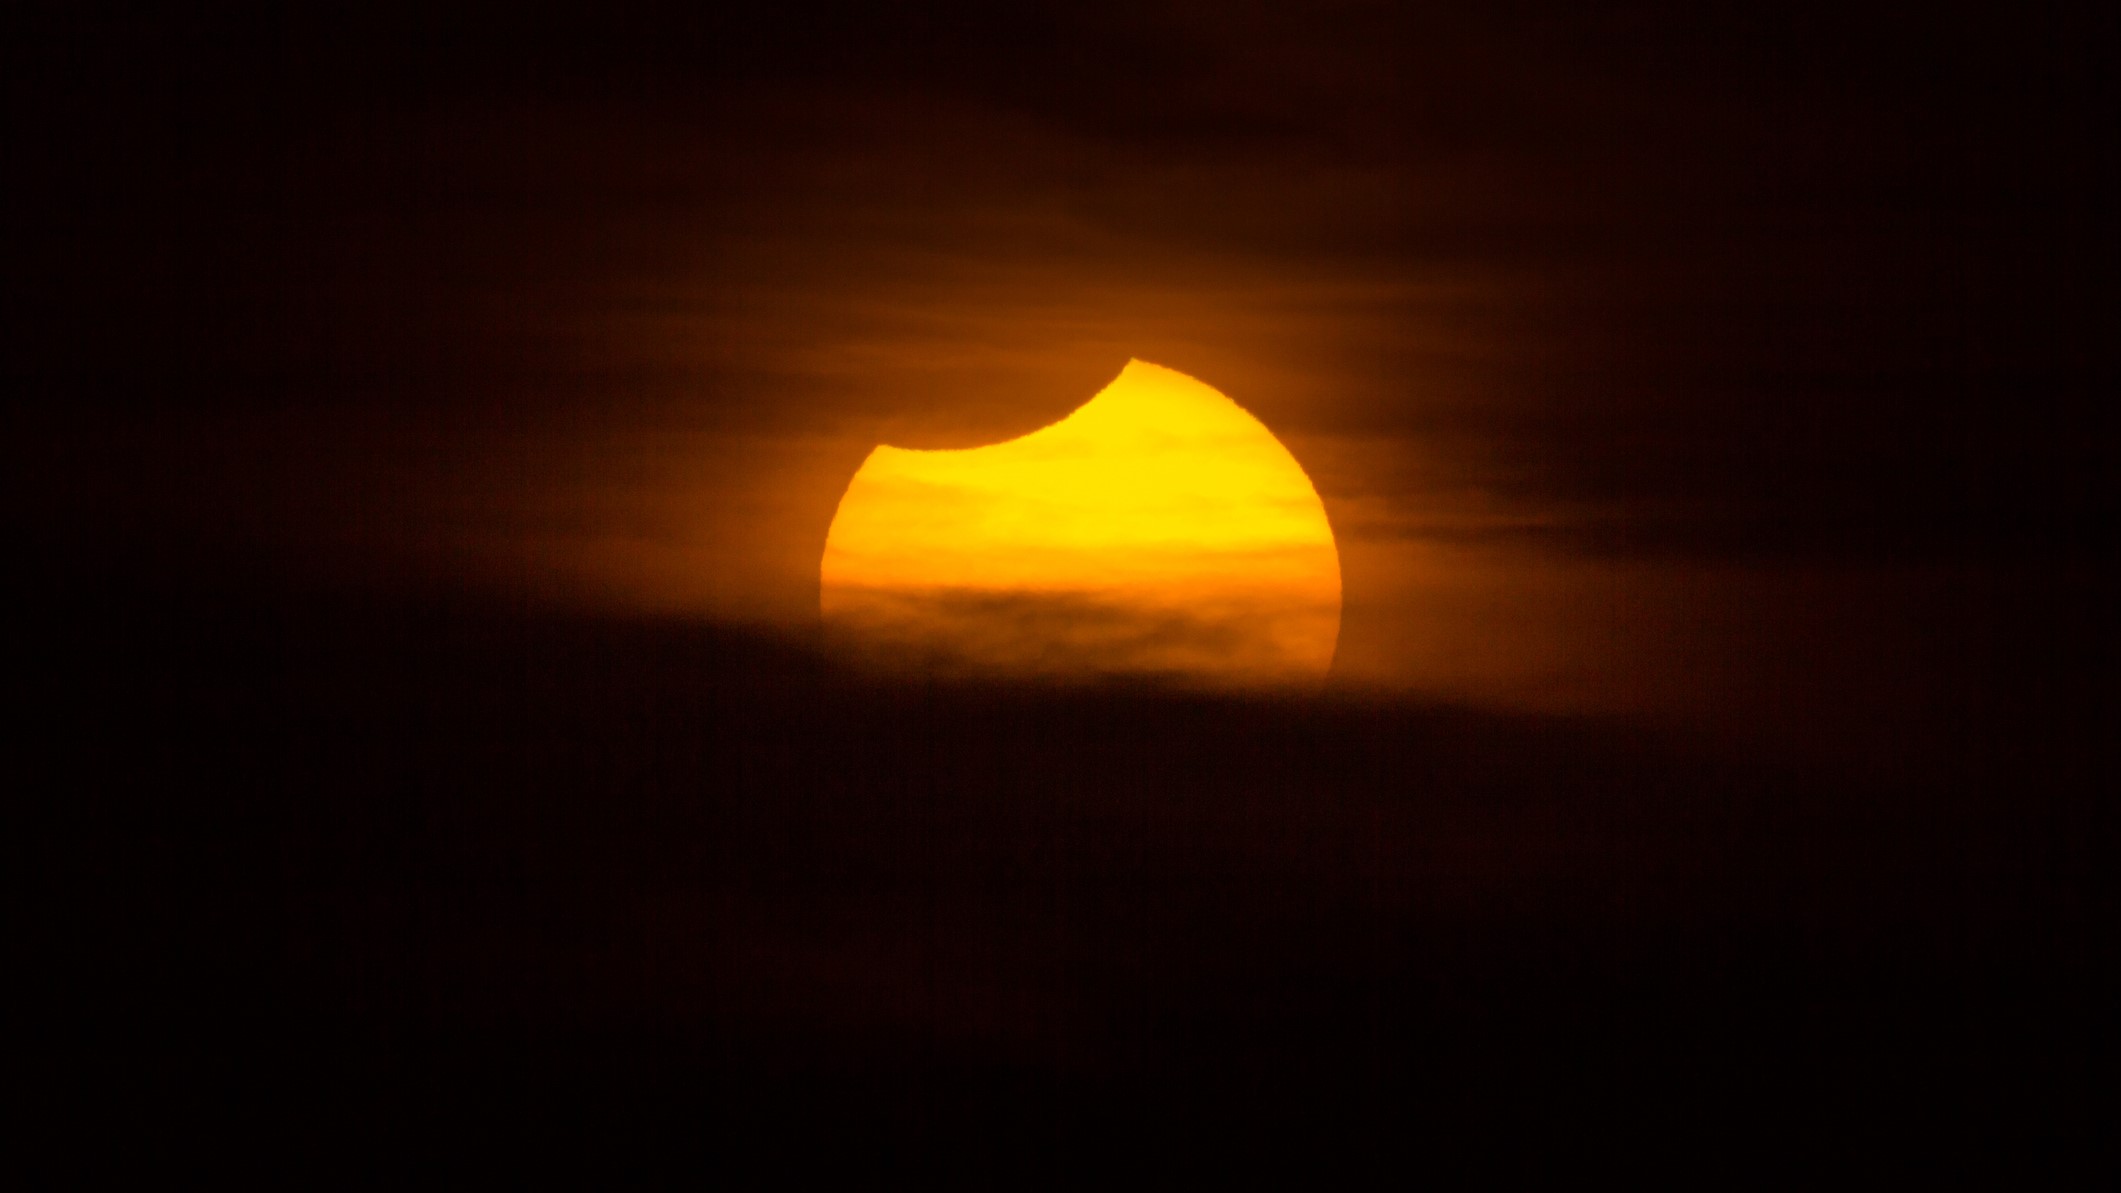 Solar eclipse observed in Montevideo, Uruguay. Image taken outdoors, no people in the image. At the same time sun is setting over the horizon, over Rio de La Plata.